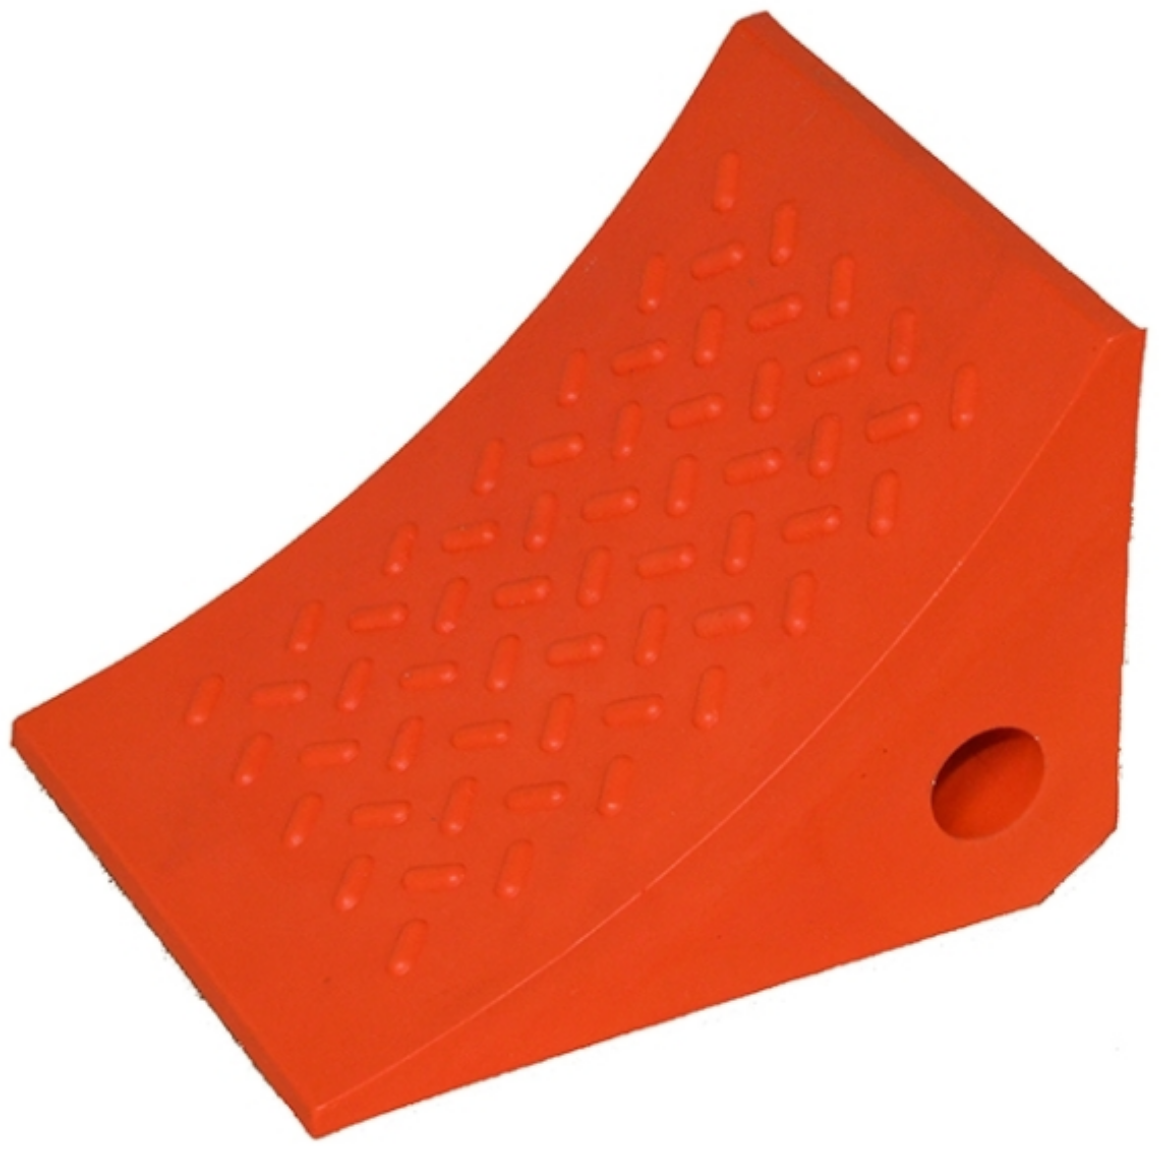 Picture of Medium Urethane Wheel Chock (L) 280mm x (W) 200mm x (H) 200mm
Suits 96cm Tyres